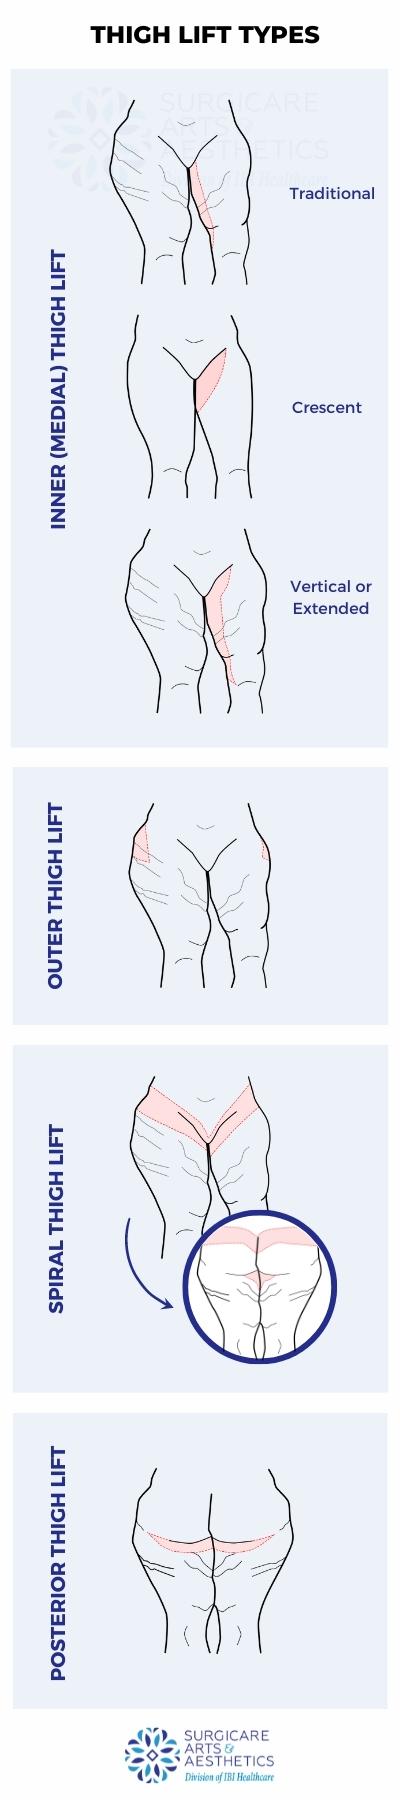 Illustration: Different types of thigh lifts